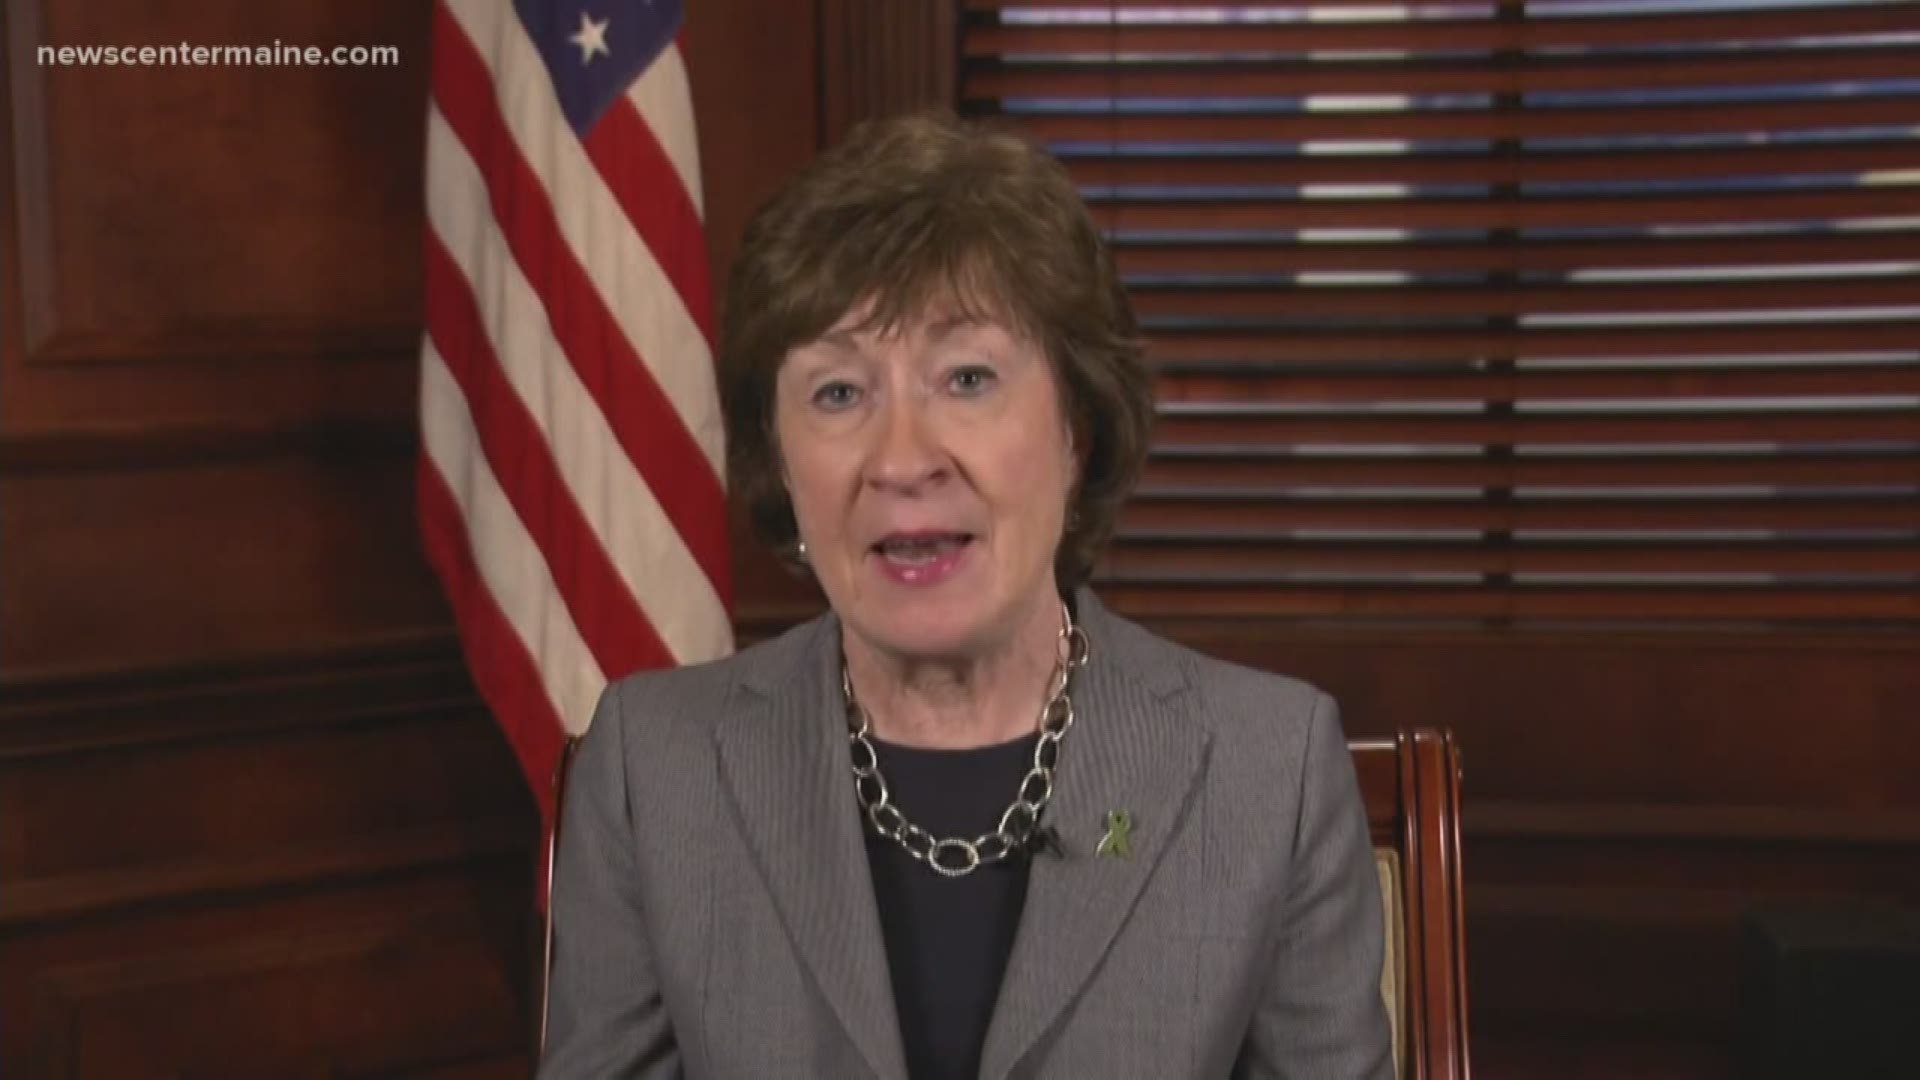 Sen. Collins will not comment on impeachment inquiry.